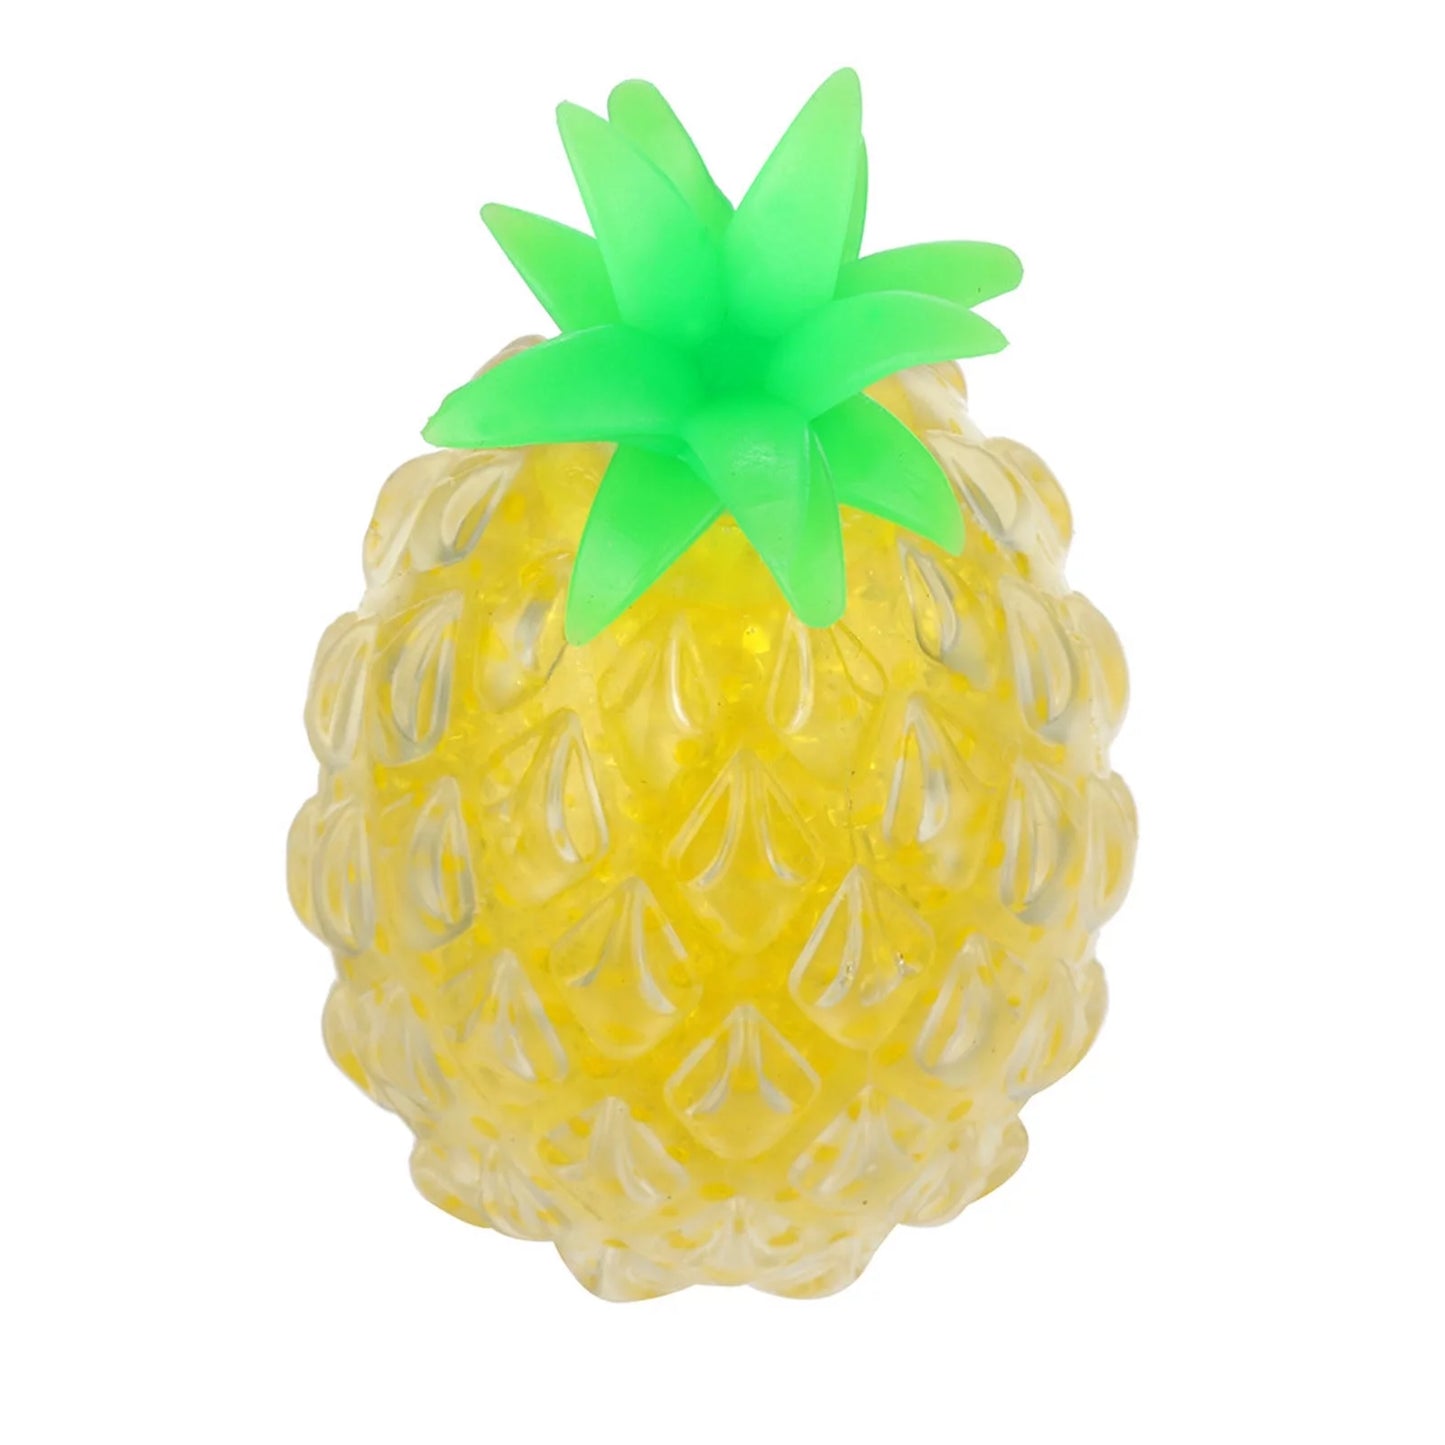 Pineapple Stress Ball, Squishy Toy Stress Ball for Adults with Anxiety Autism, Pineapple Fruit Squeeze Balls Sensory Toy for Pressure Release Party Gift